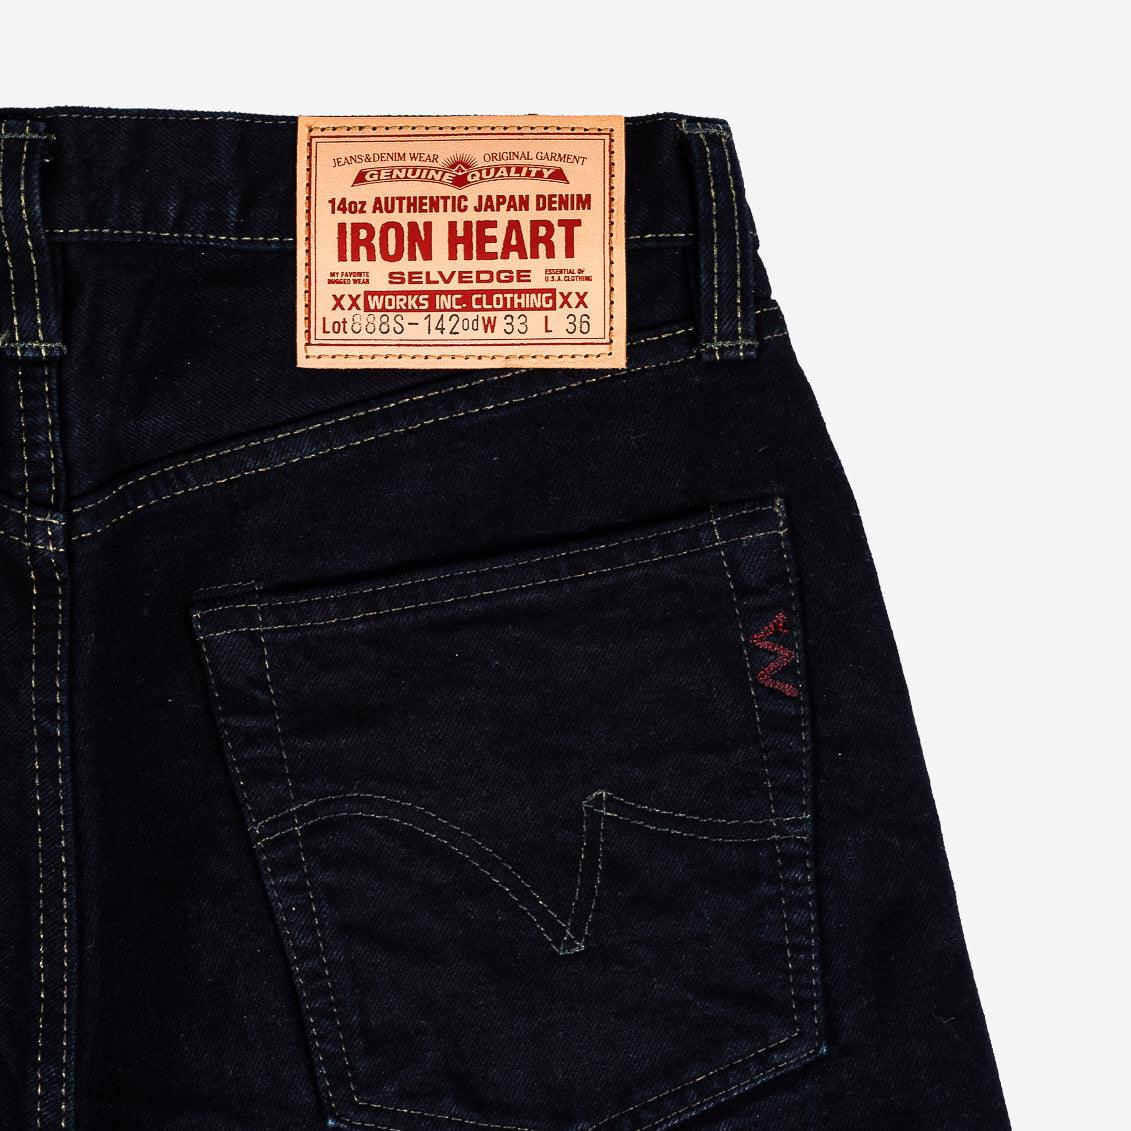 Iron Heart IH-888S-142OD 14oz Overdyed Selvedge Denim Tapered Cut - Guilty Party